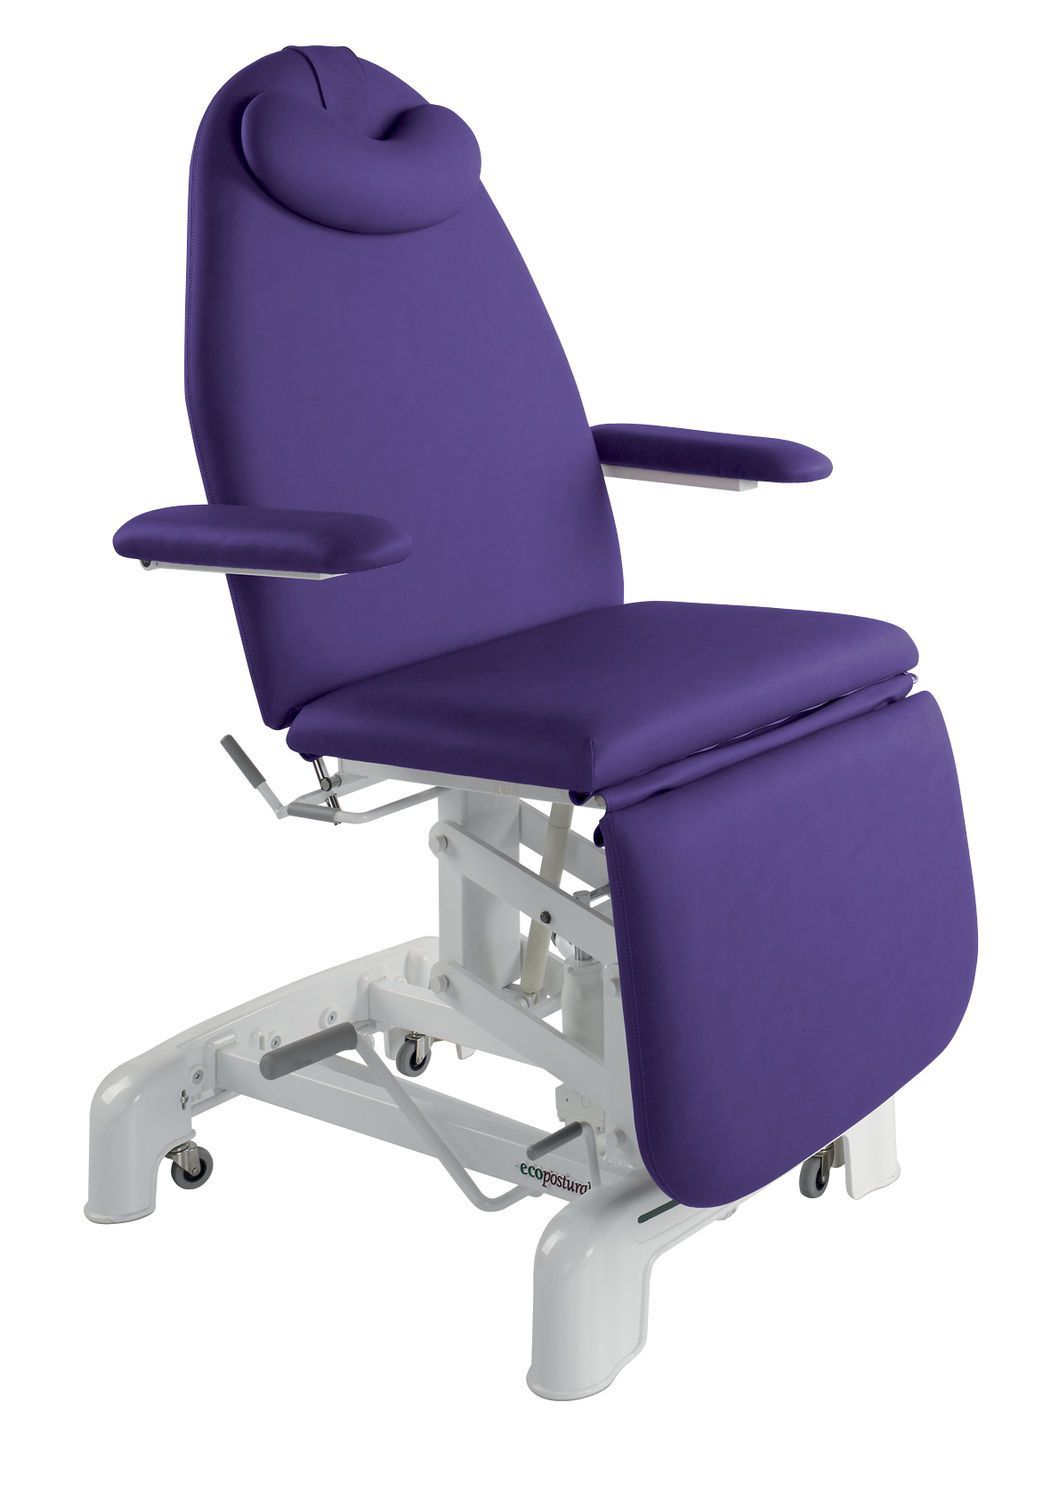 Medical examination chair / hydraulic / height-adjustable / 3-section C-3771-M41 Ecopostural